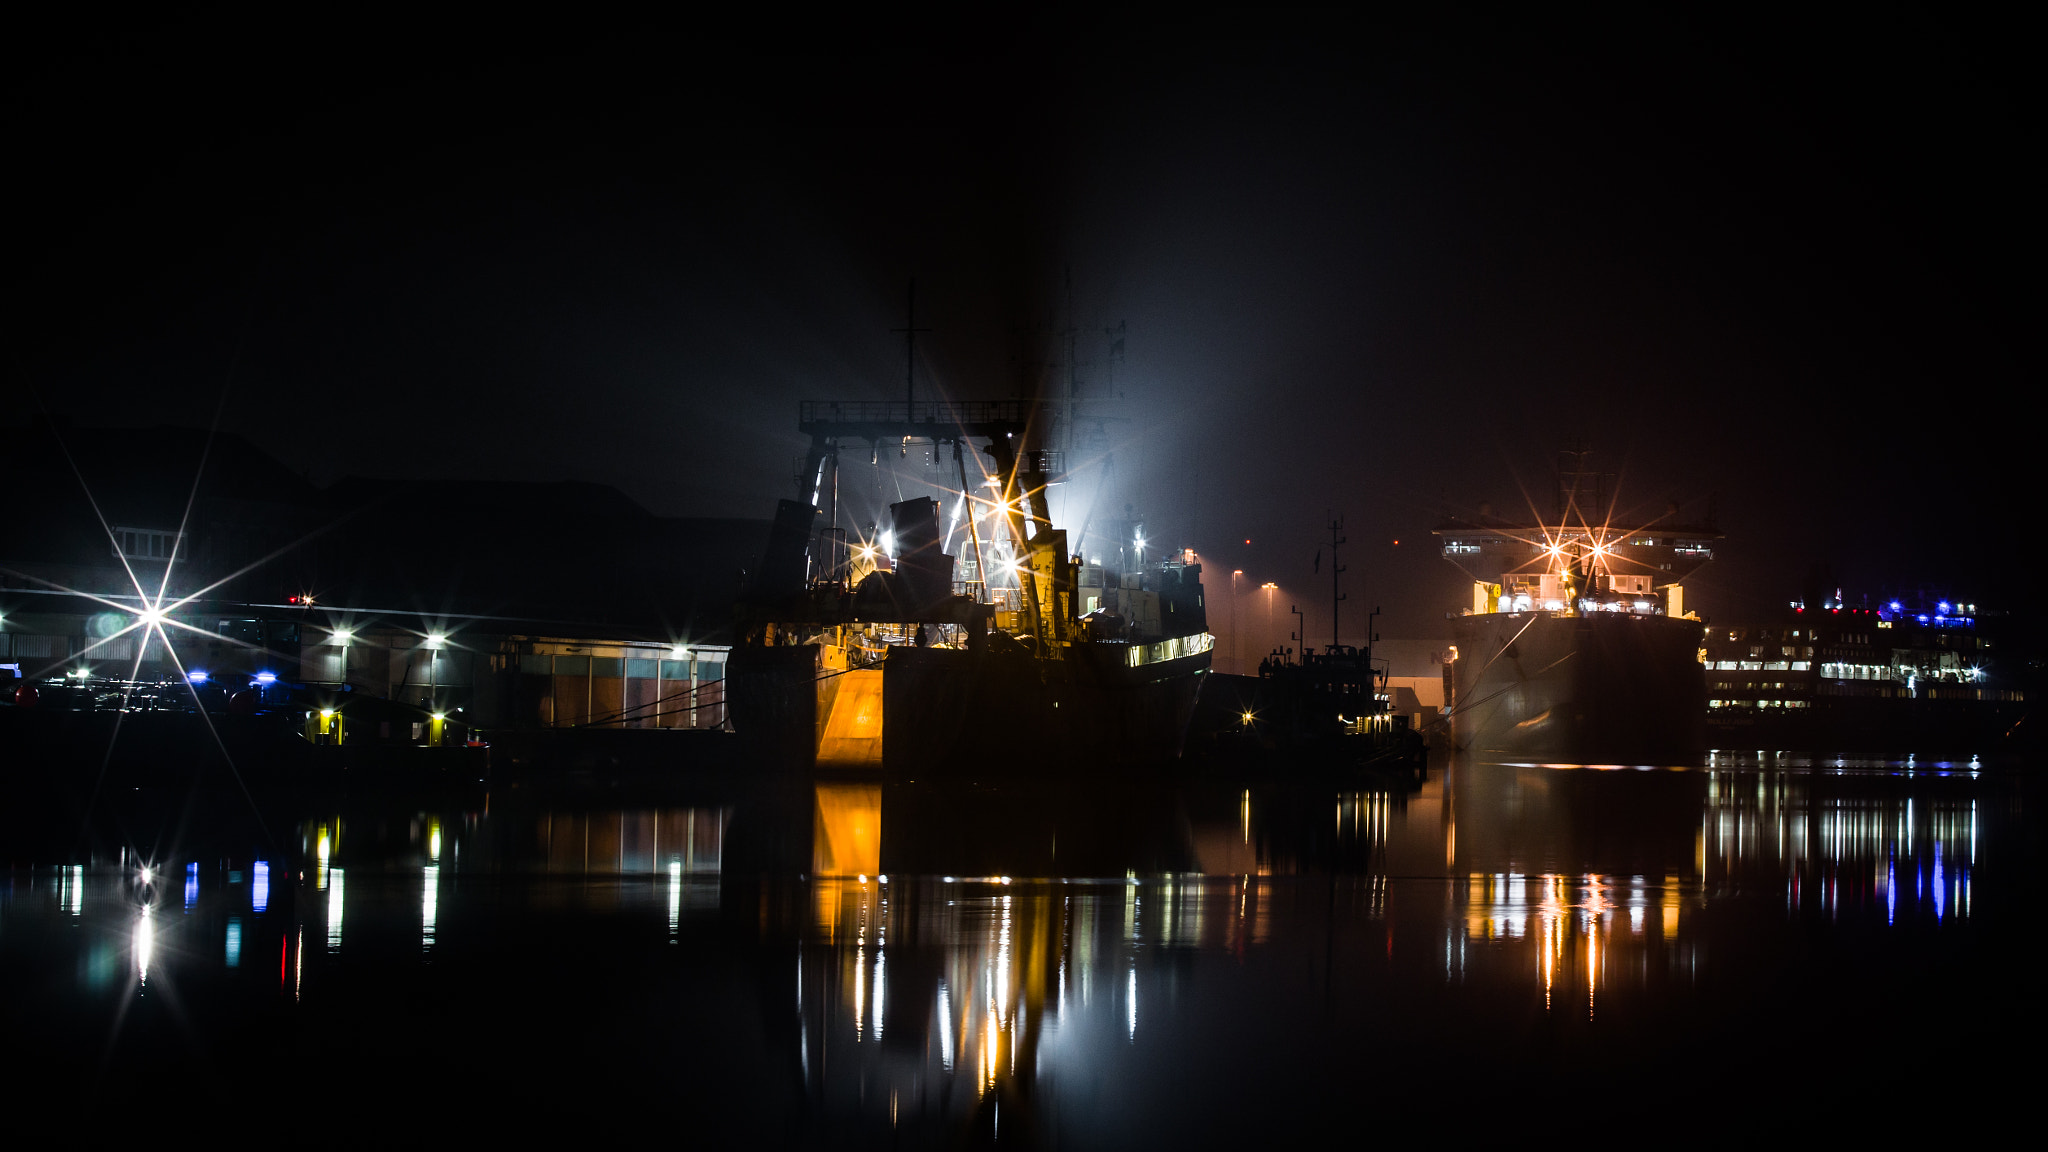 Sony SLT-A58 + Minolta AF 28-85mm F3.5-4.5 New sample photo. Night @ habour bremerhaven photography